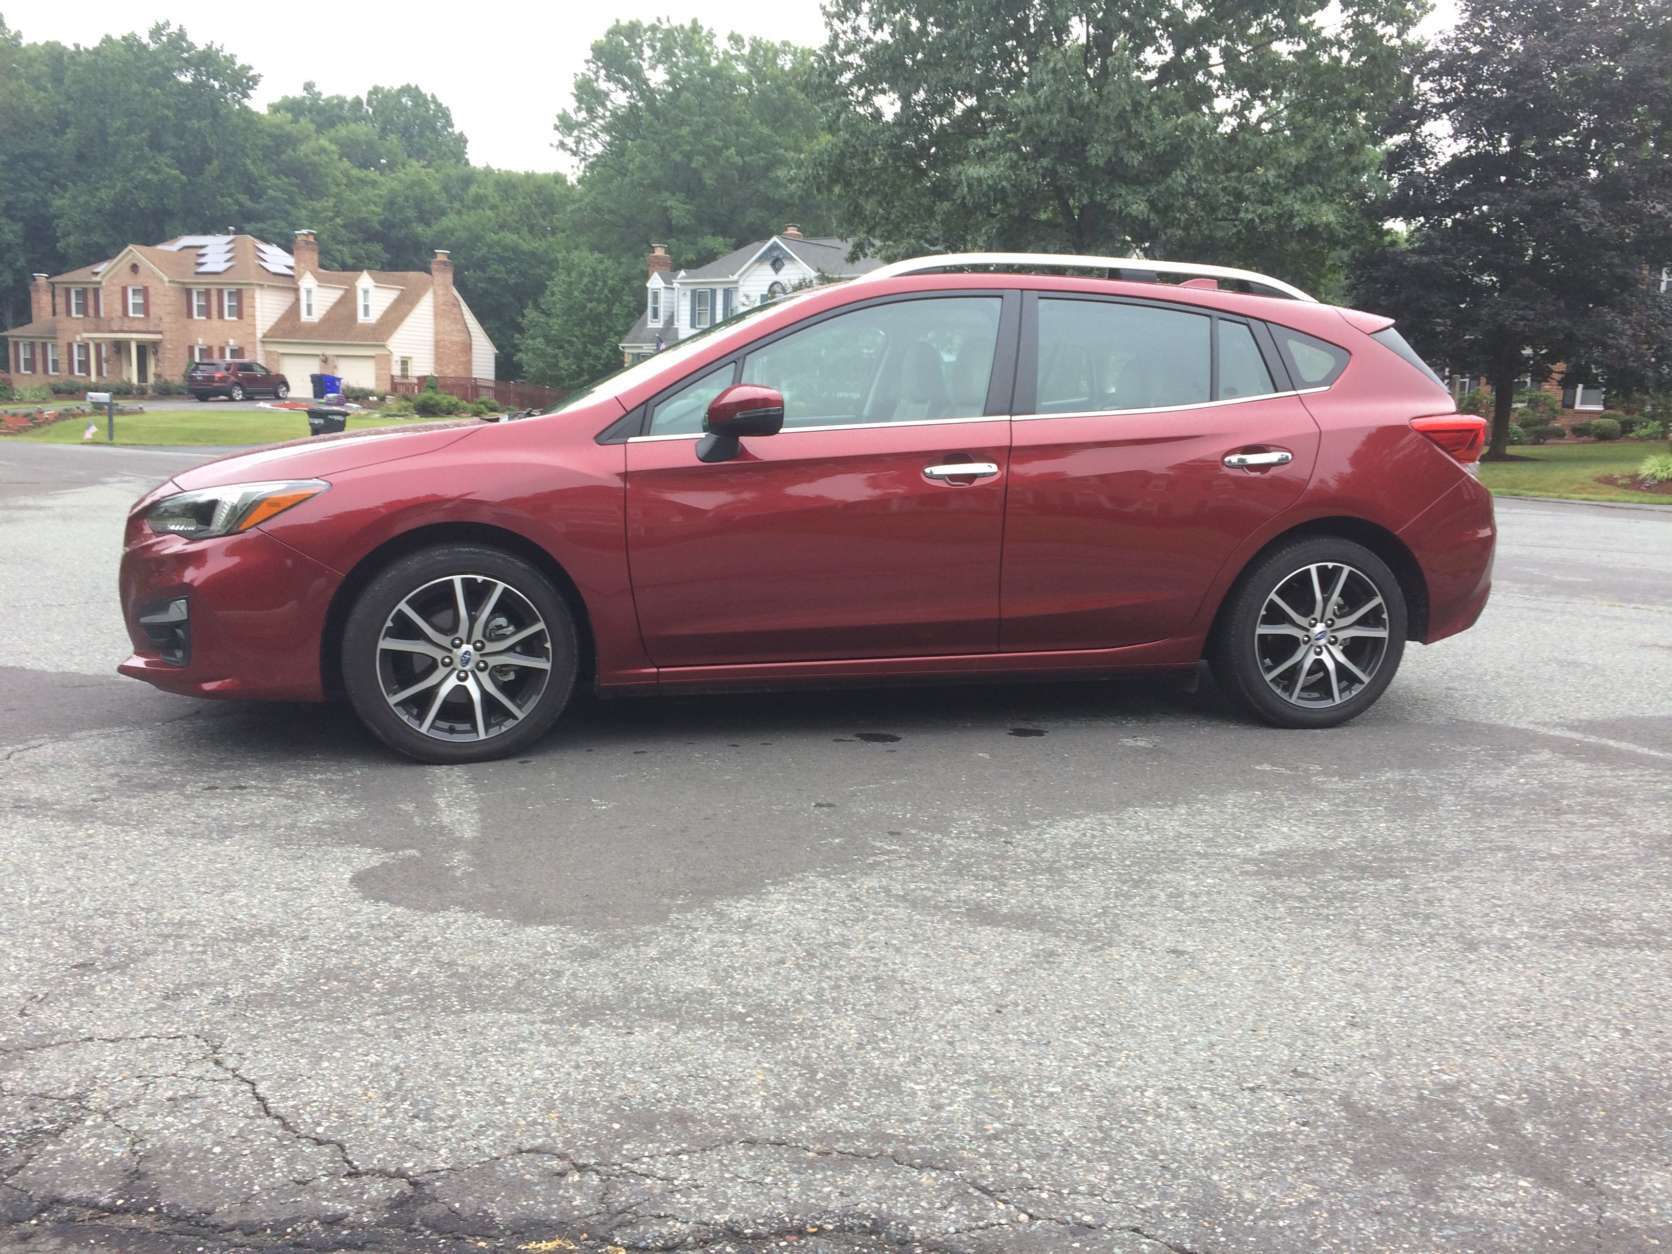 The Subaru Impreza has a more modern, rounded look. Upscale 17-inch alloy wheels are fitting on this car. (WTOP/Mike Parris)